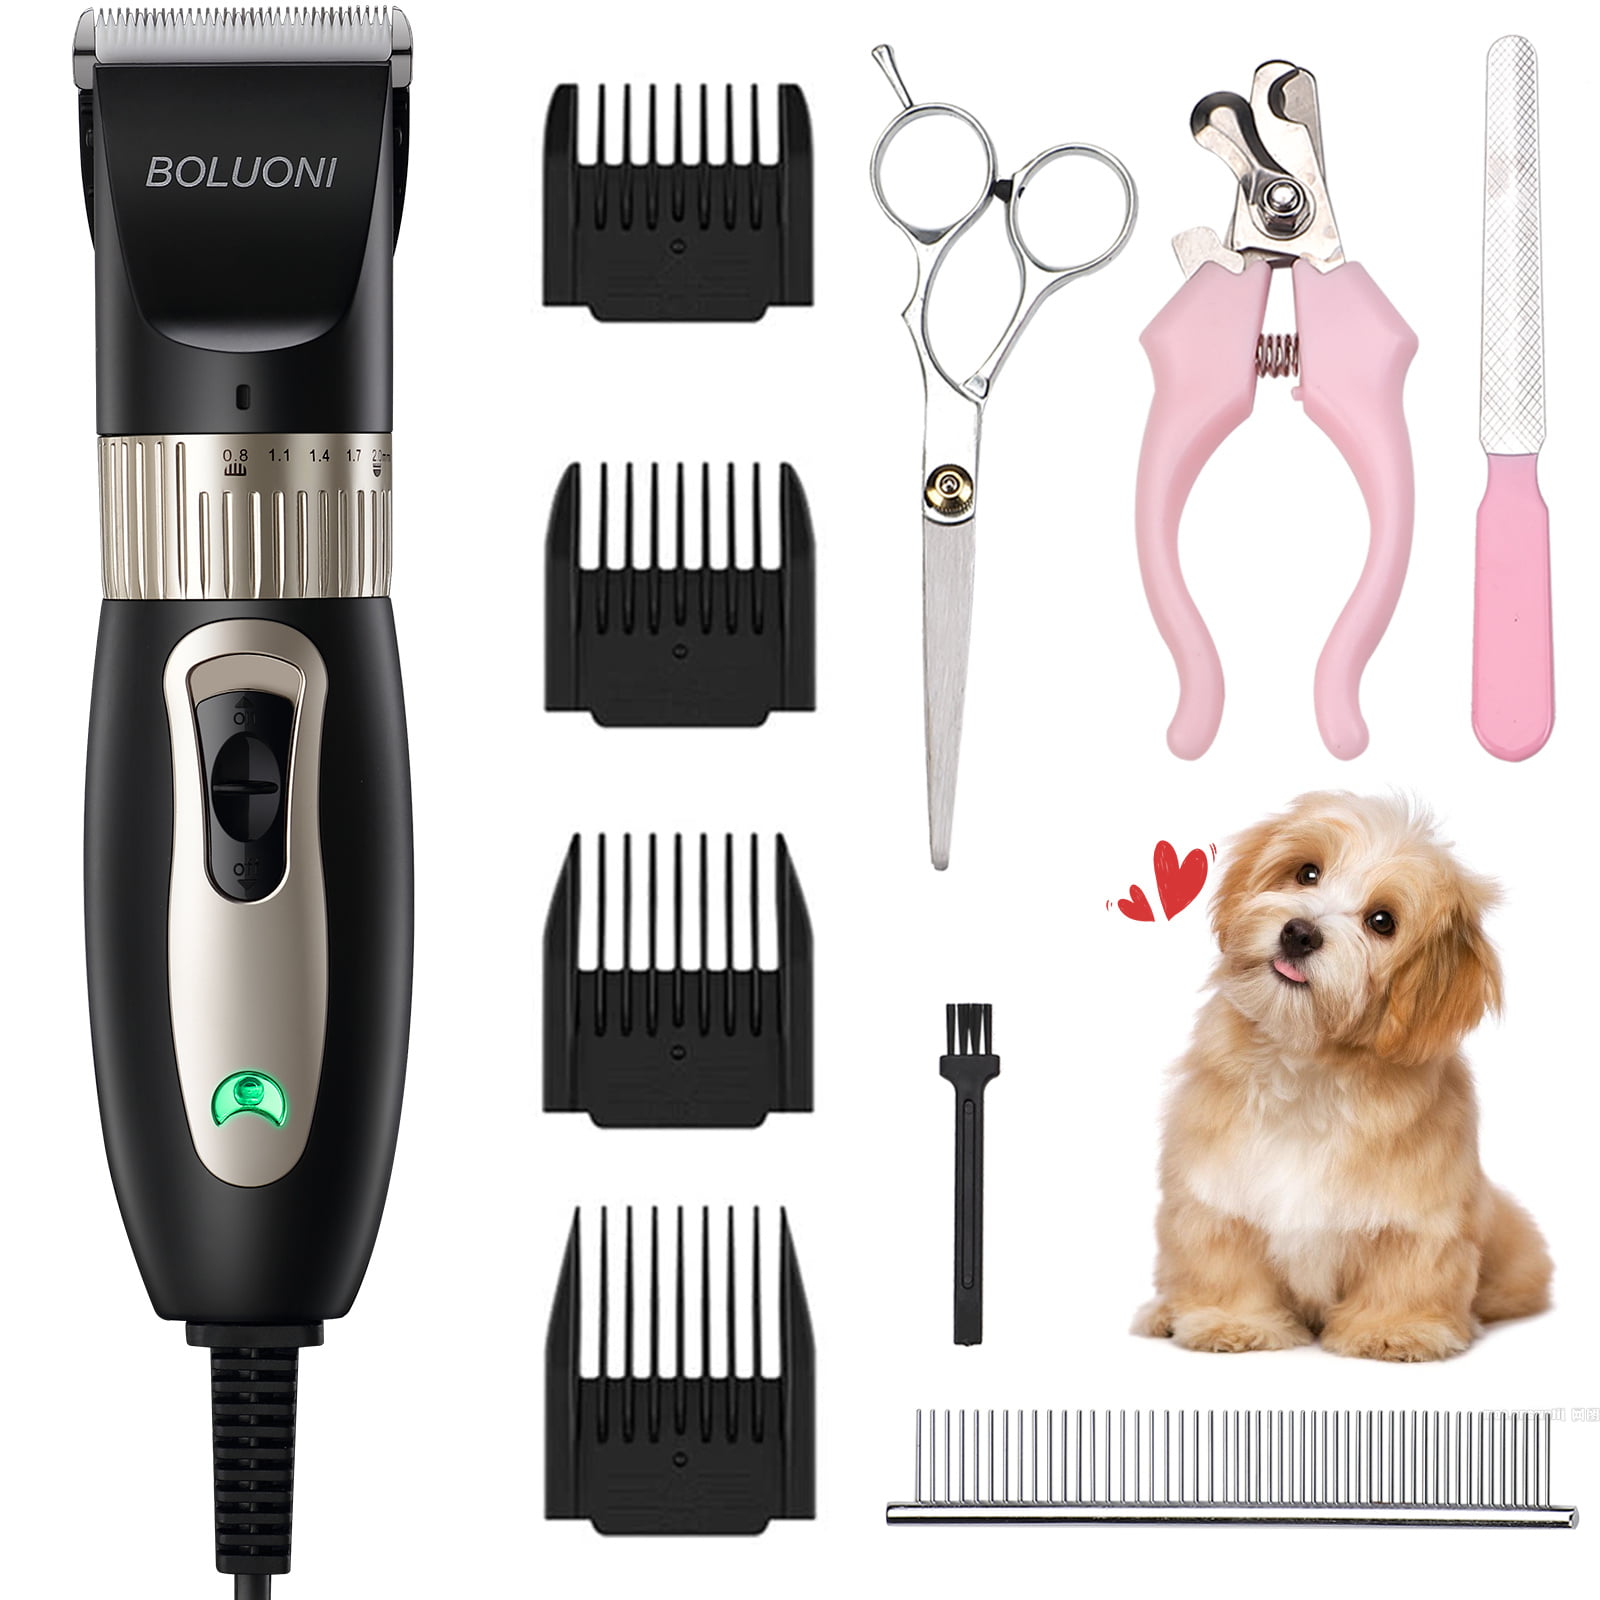 M02-03 Dog Clippers Shaver 12V High Power Dog Grooming Clippers for Thick  Heavy Coats Plug-in Professional Pet Trimmer Clippers Kit with 4 Guard Comb  